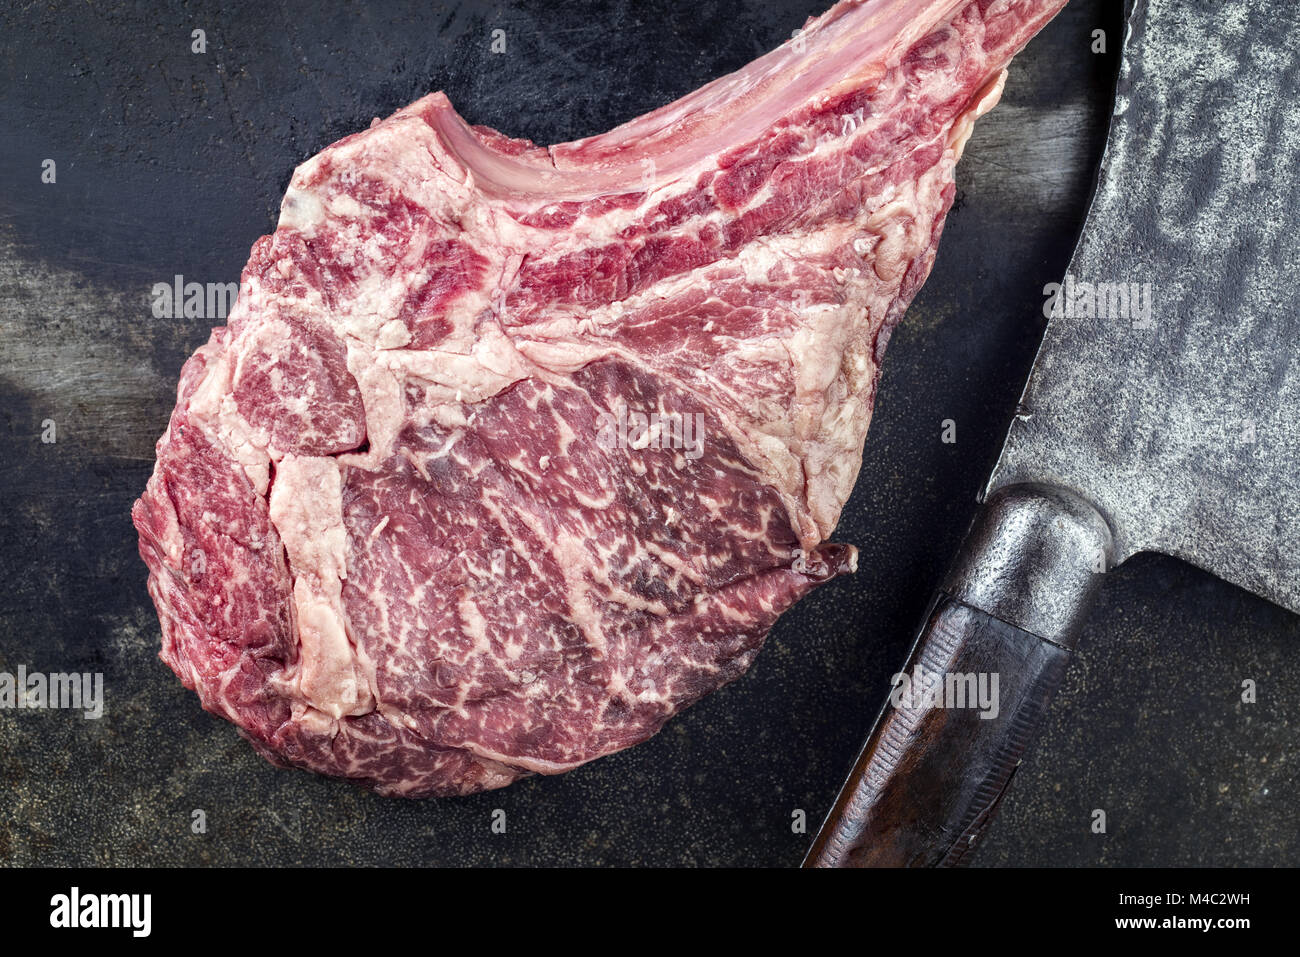 https://c8.alamy.com/comp/M4C2WH/wagyu-tomahawk-steak-with-old-chopper-on-metall-sheet-M4C2WH.jpg